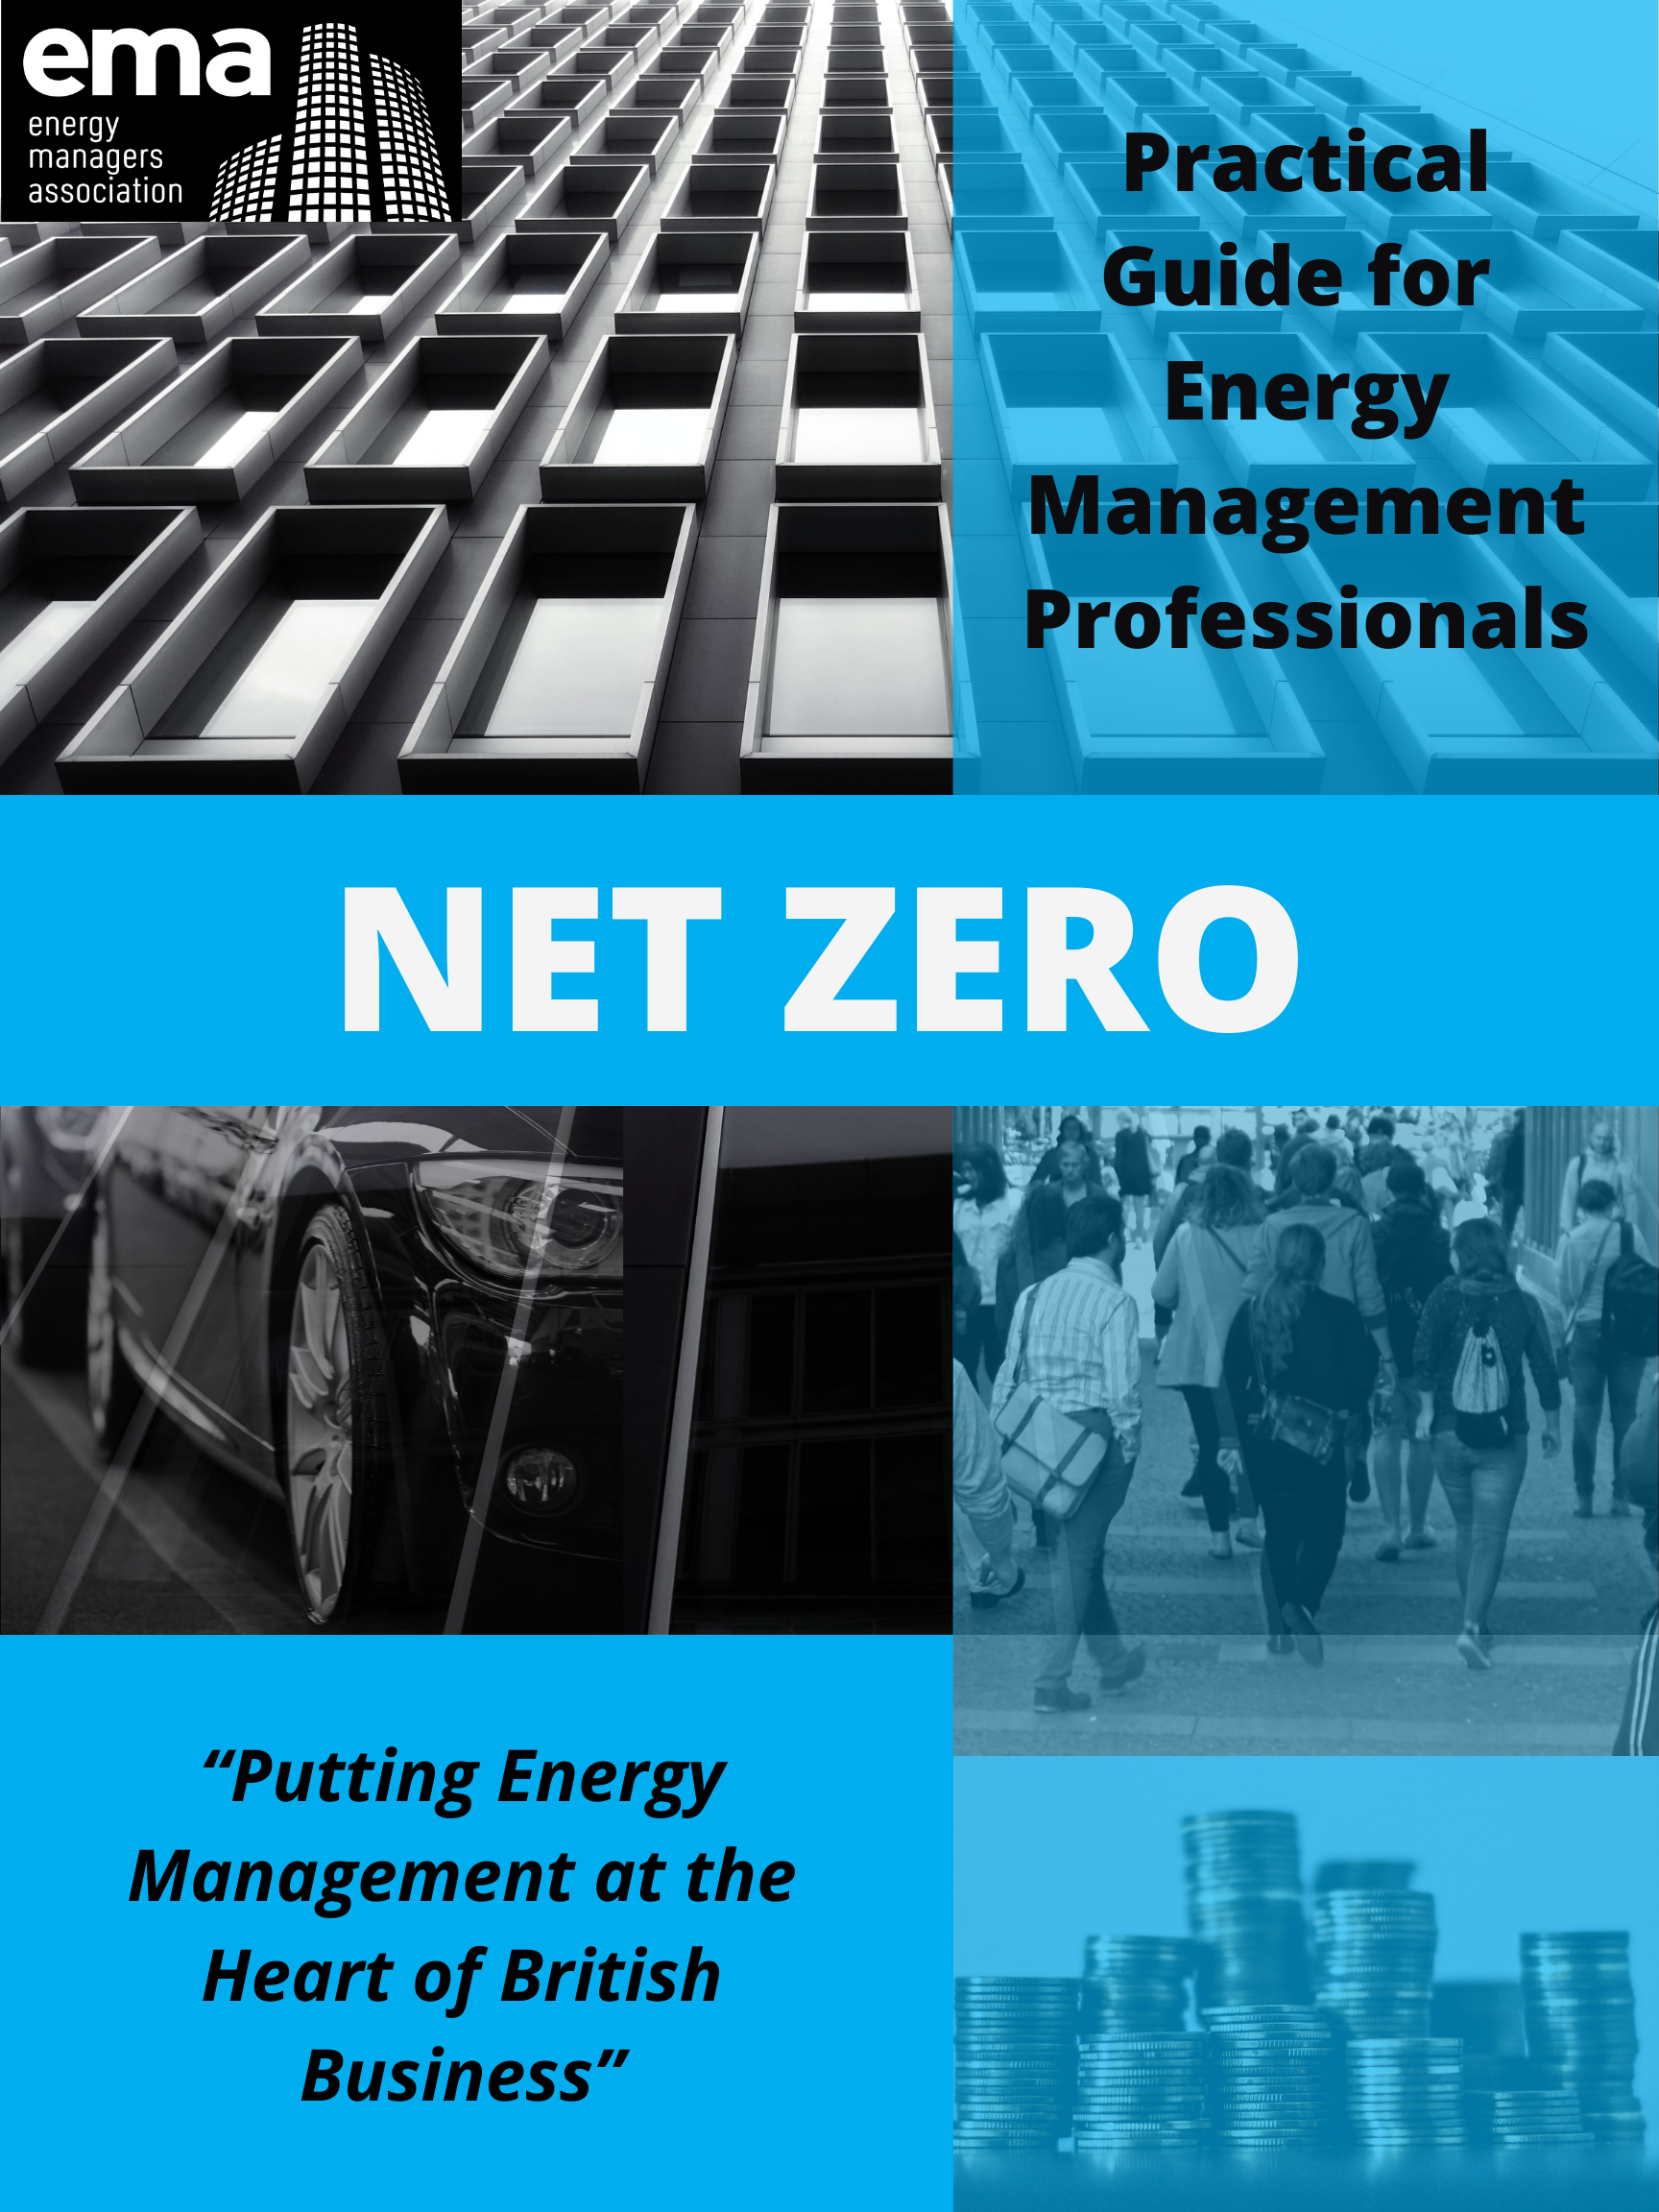 Net Zero Guide Front Page V1